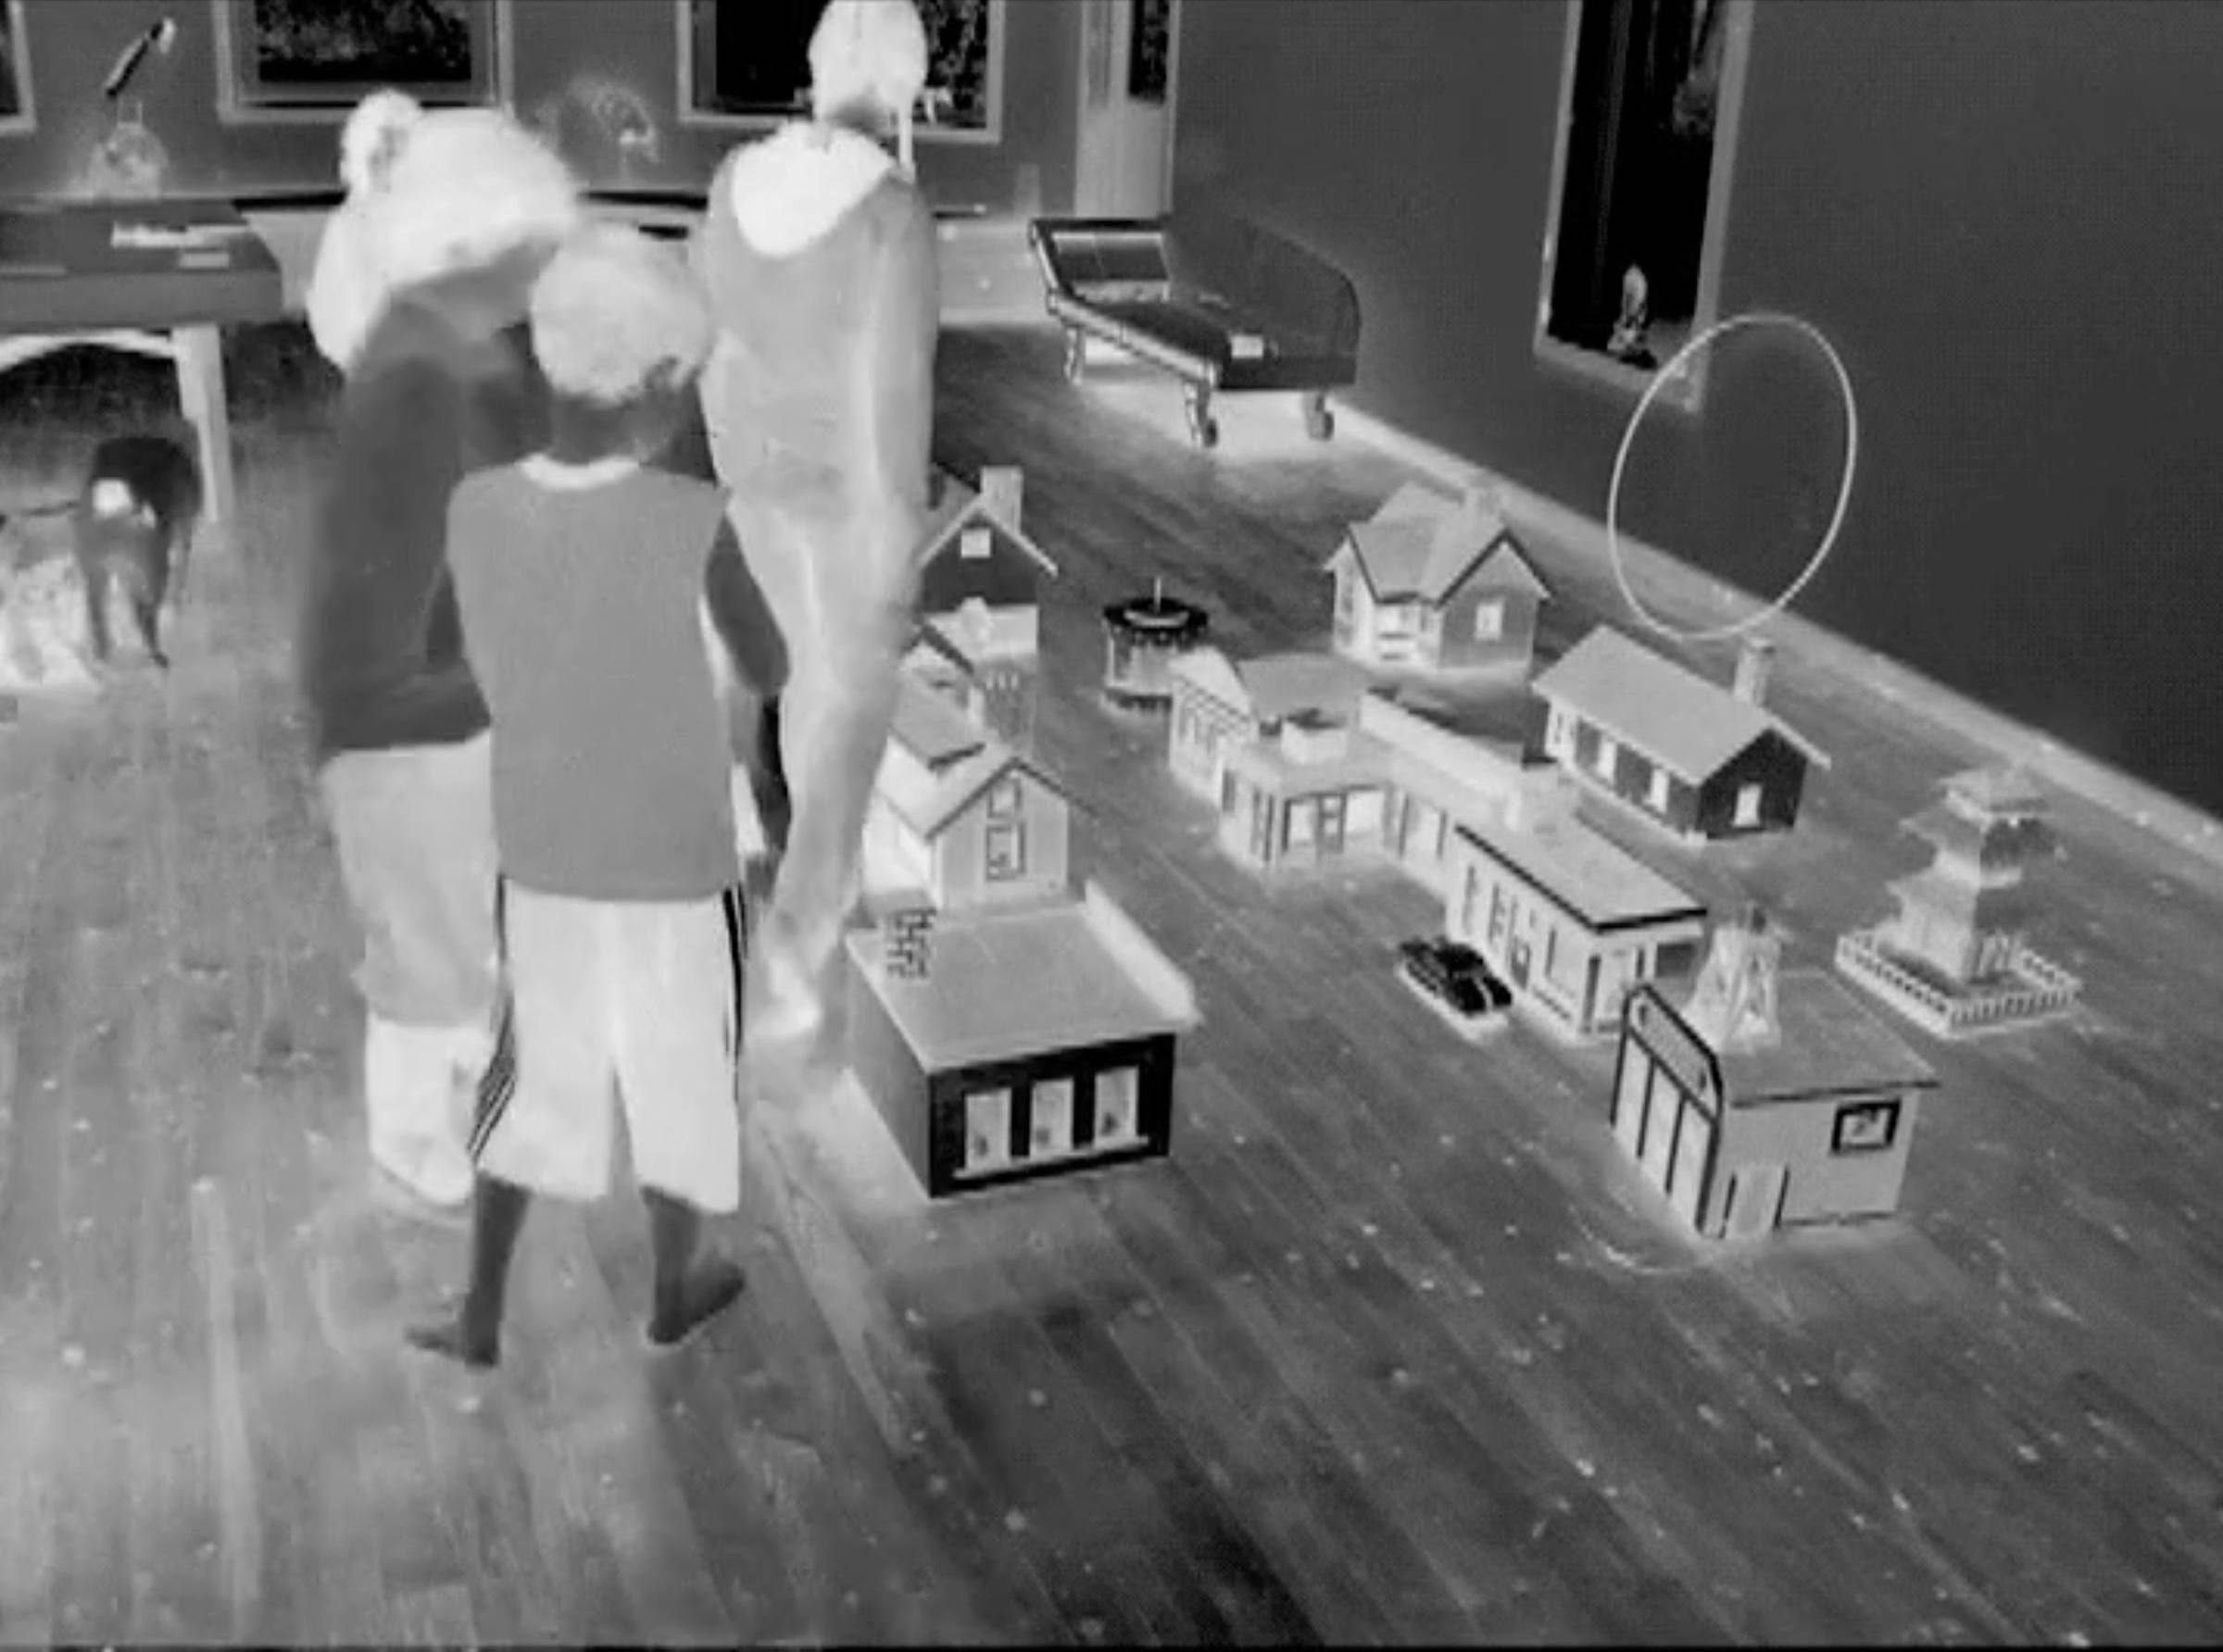 a black and white image of children in a room with a wooden floor looking at small wooden dolls' houses